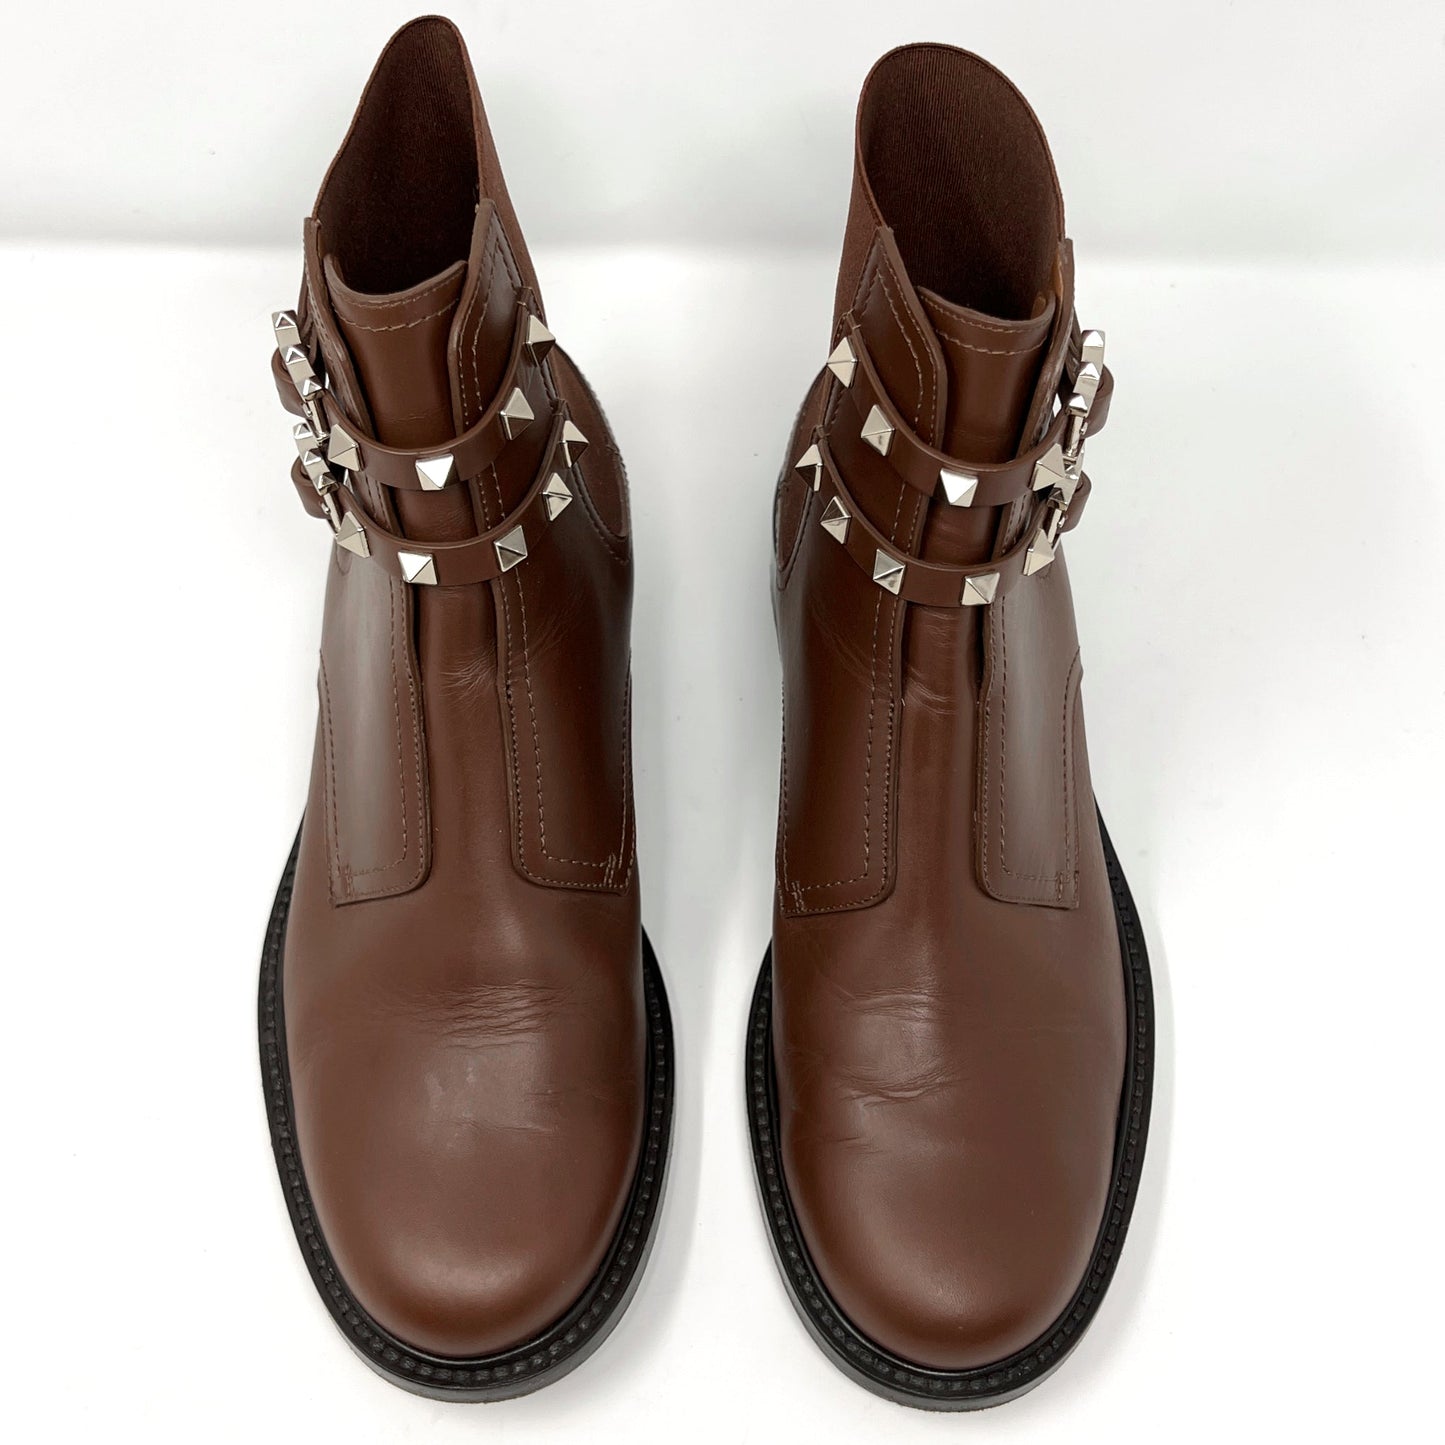 Valentino Rockstud Gold Studded Brown Leather Double Buckle Ankle Boots Size EU 38.5